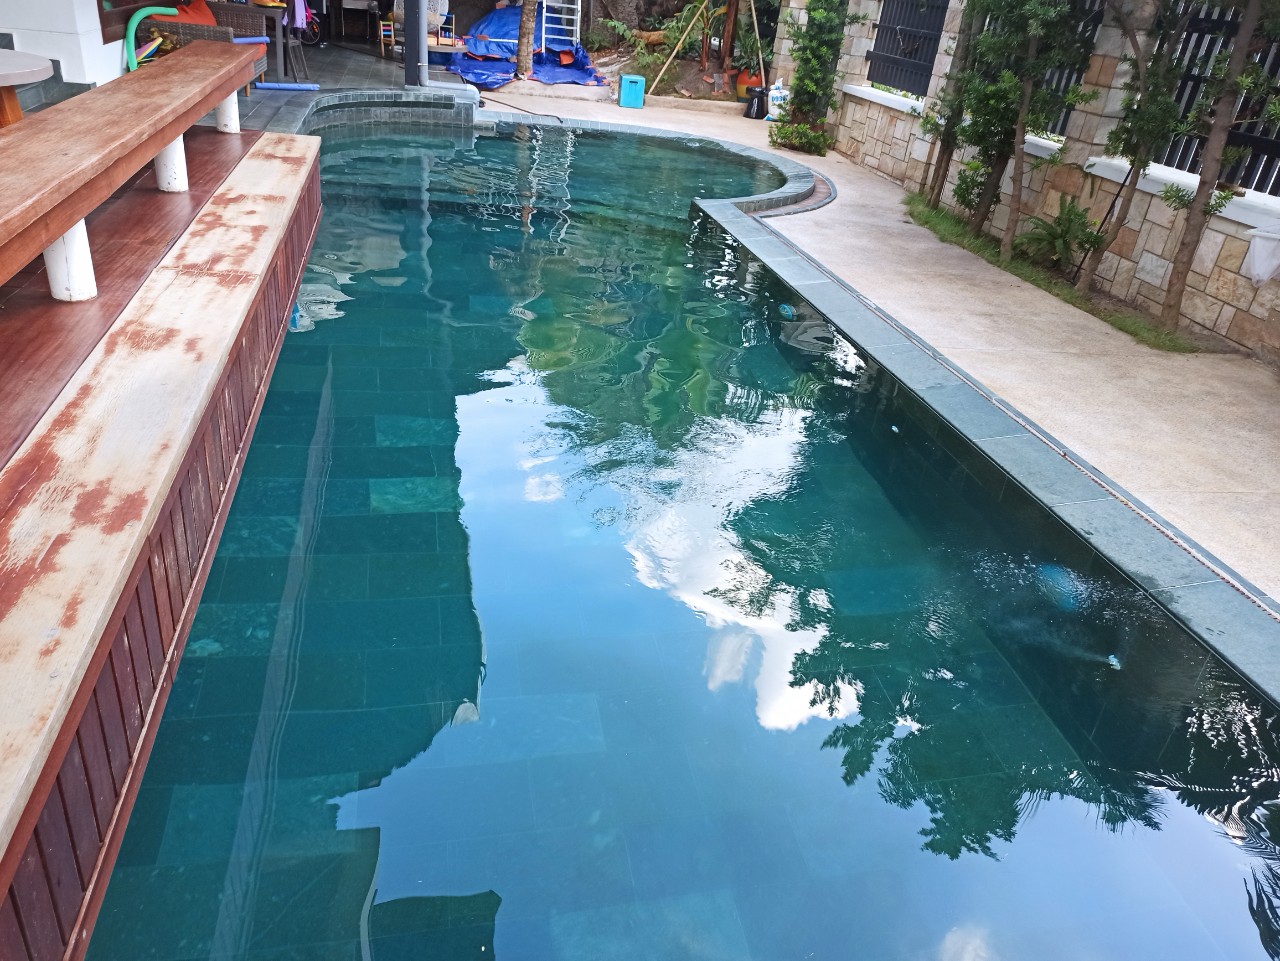 Treat house swimming pool water